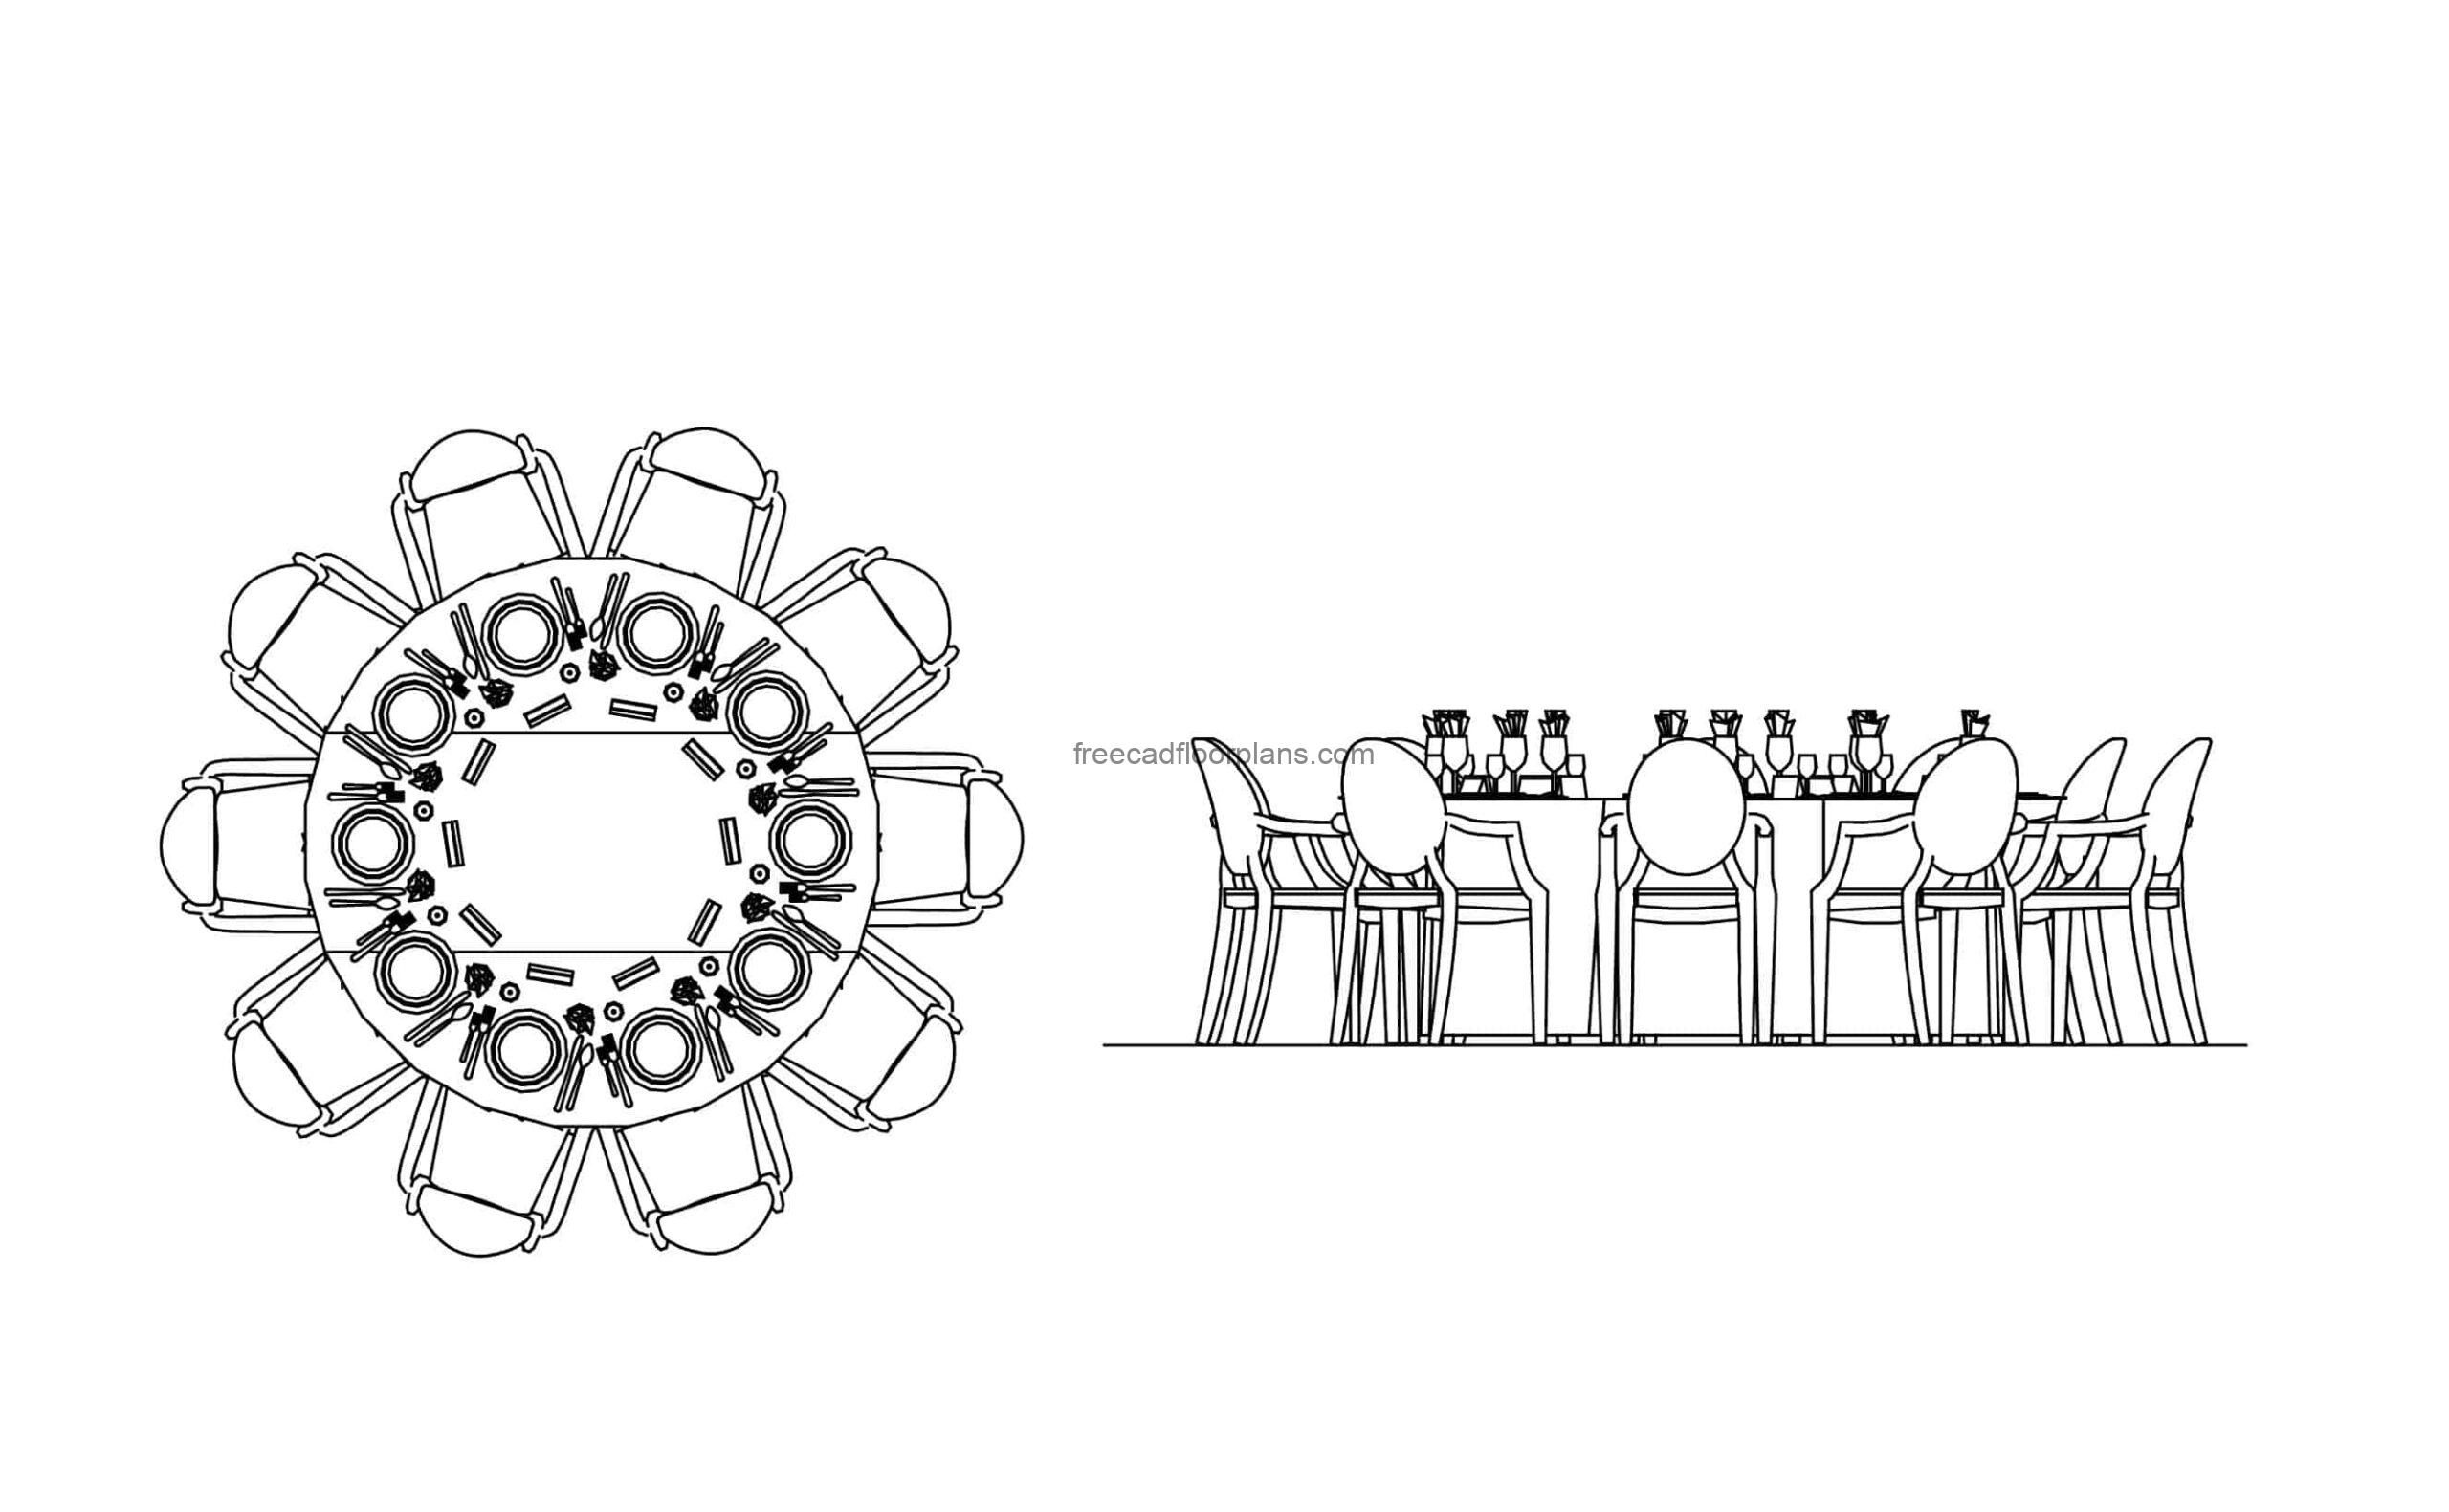 cad drawing of a wedding banquette round table front and top elevation dwg model for free download